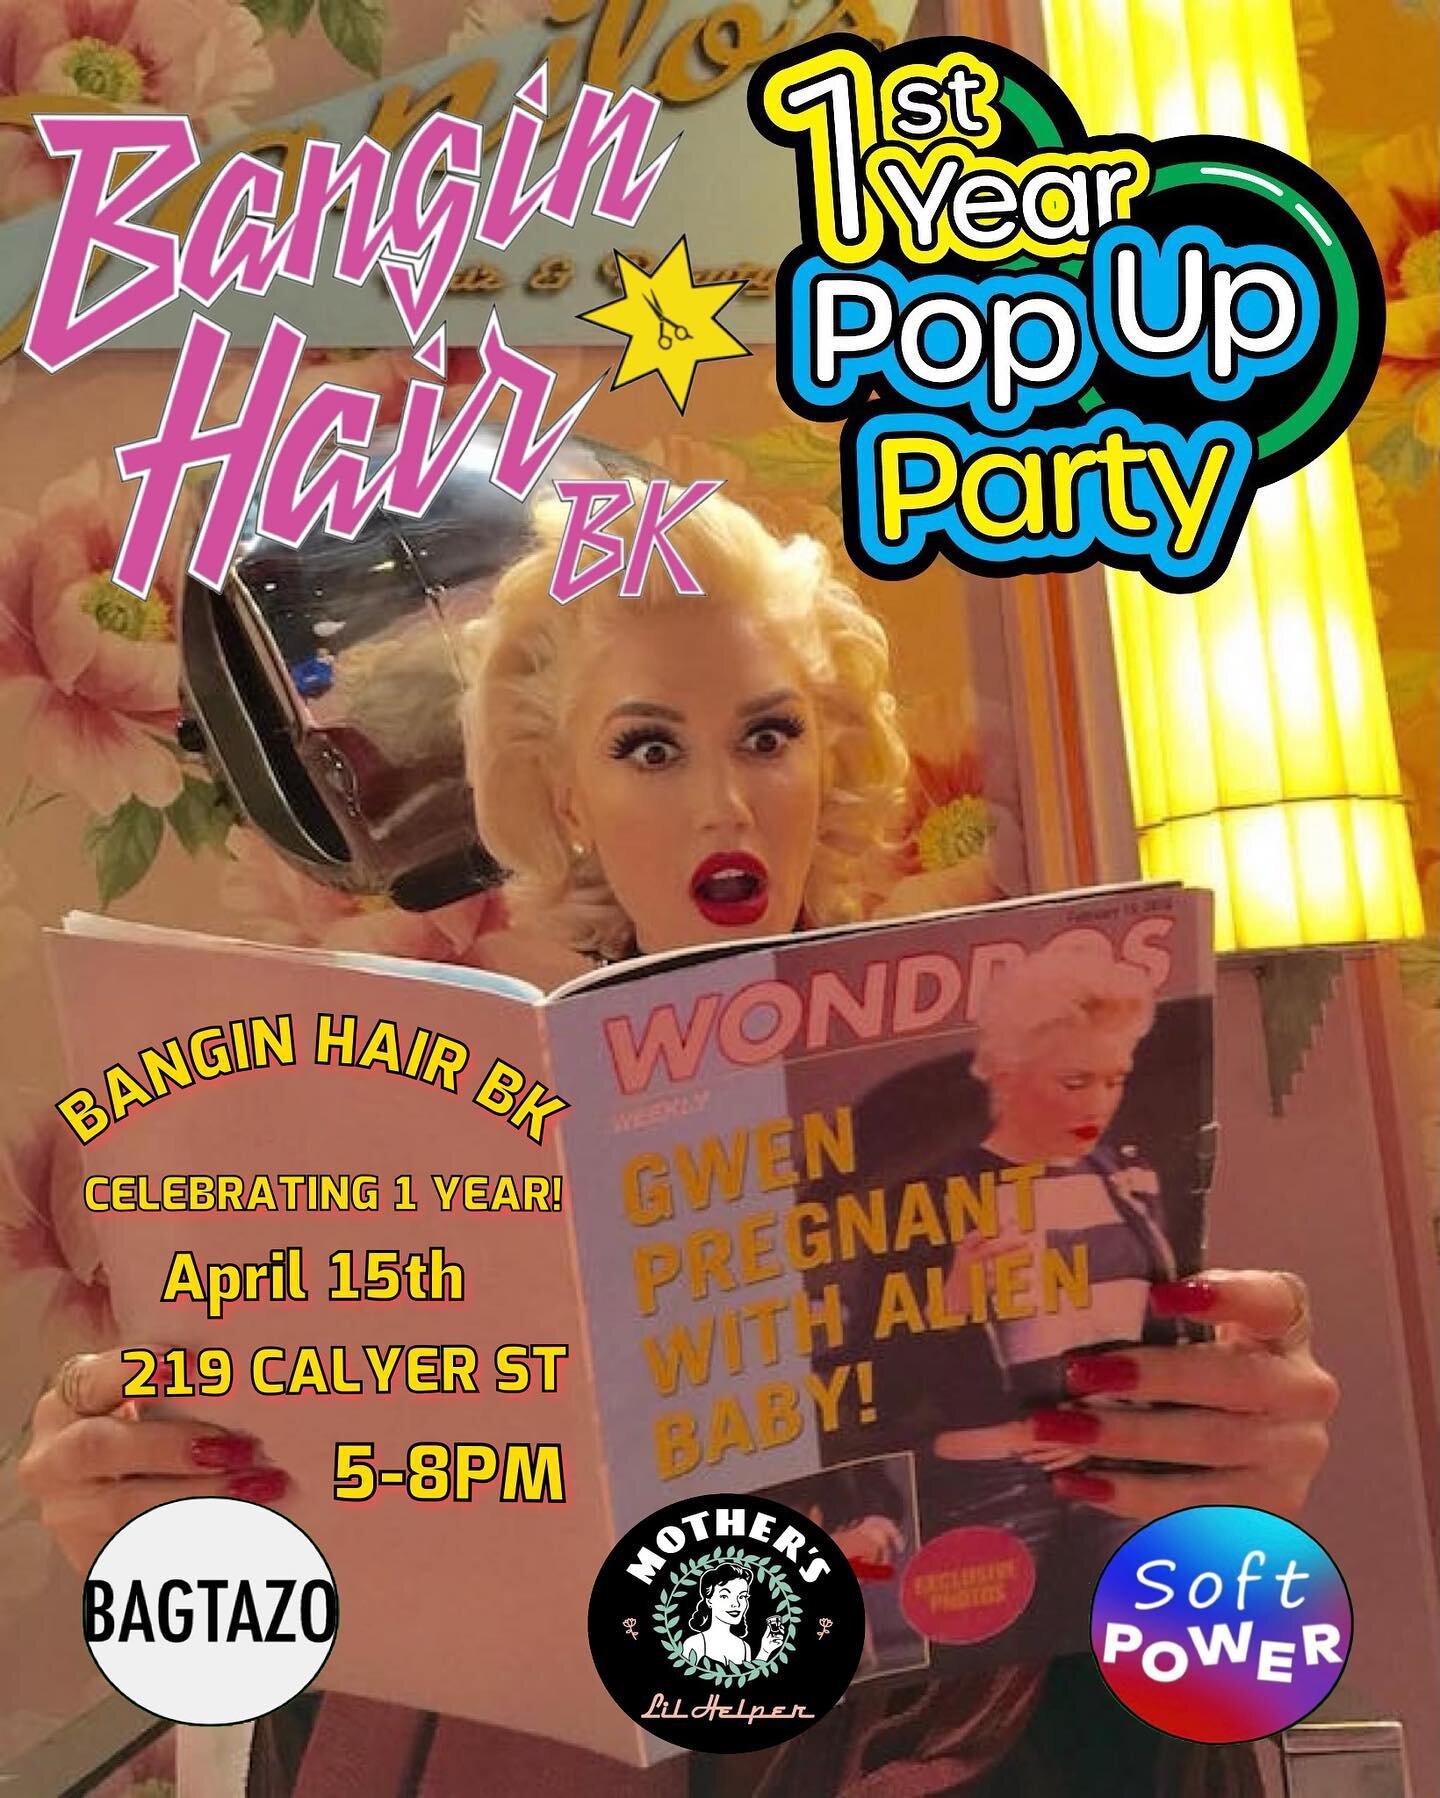 It&rsquo;s party time!! Join us April 15th to celebrate our 1 year anniversary with special guests @bagtazo @mothers_lil_hangover_helper &amp; @softpowervote 🥳
See y&rsquo;all there!!!